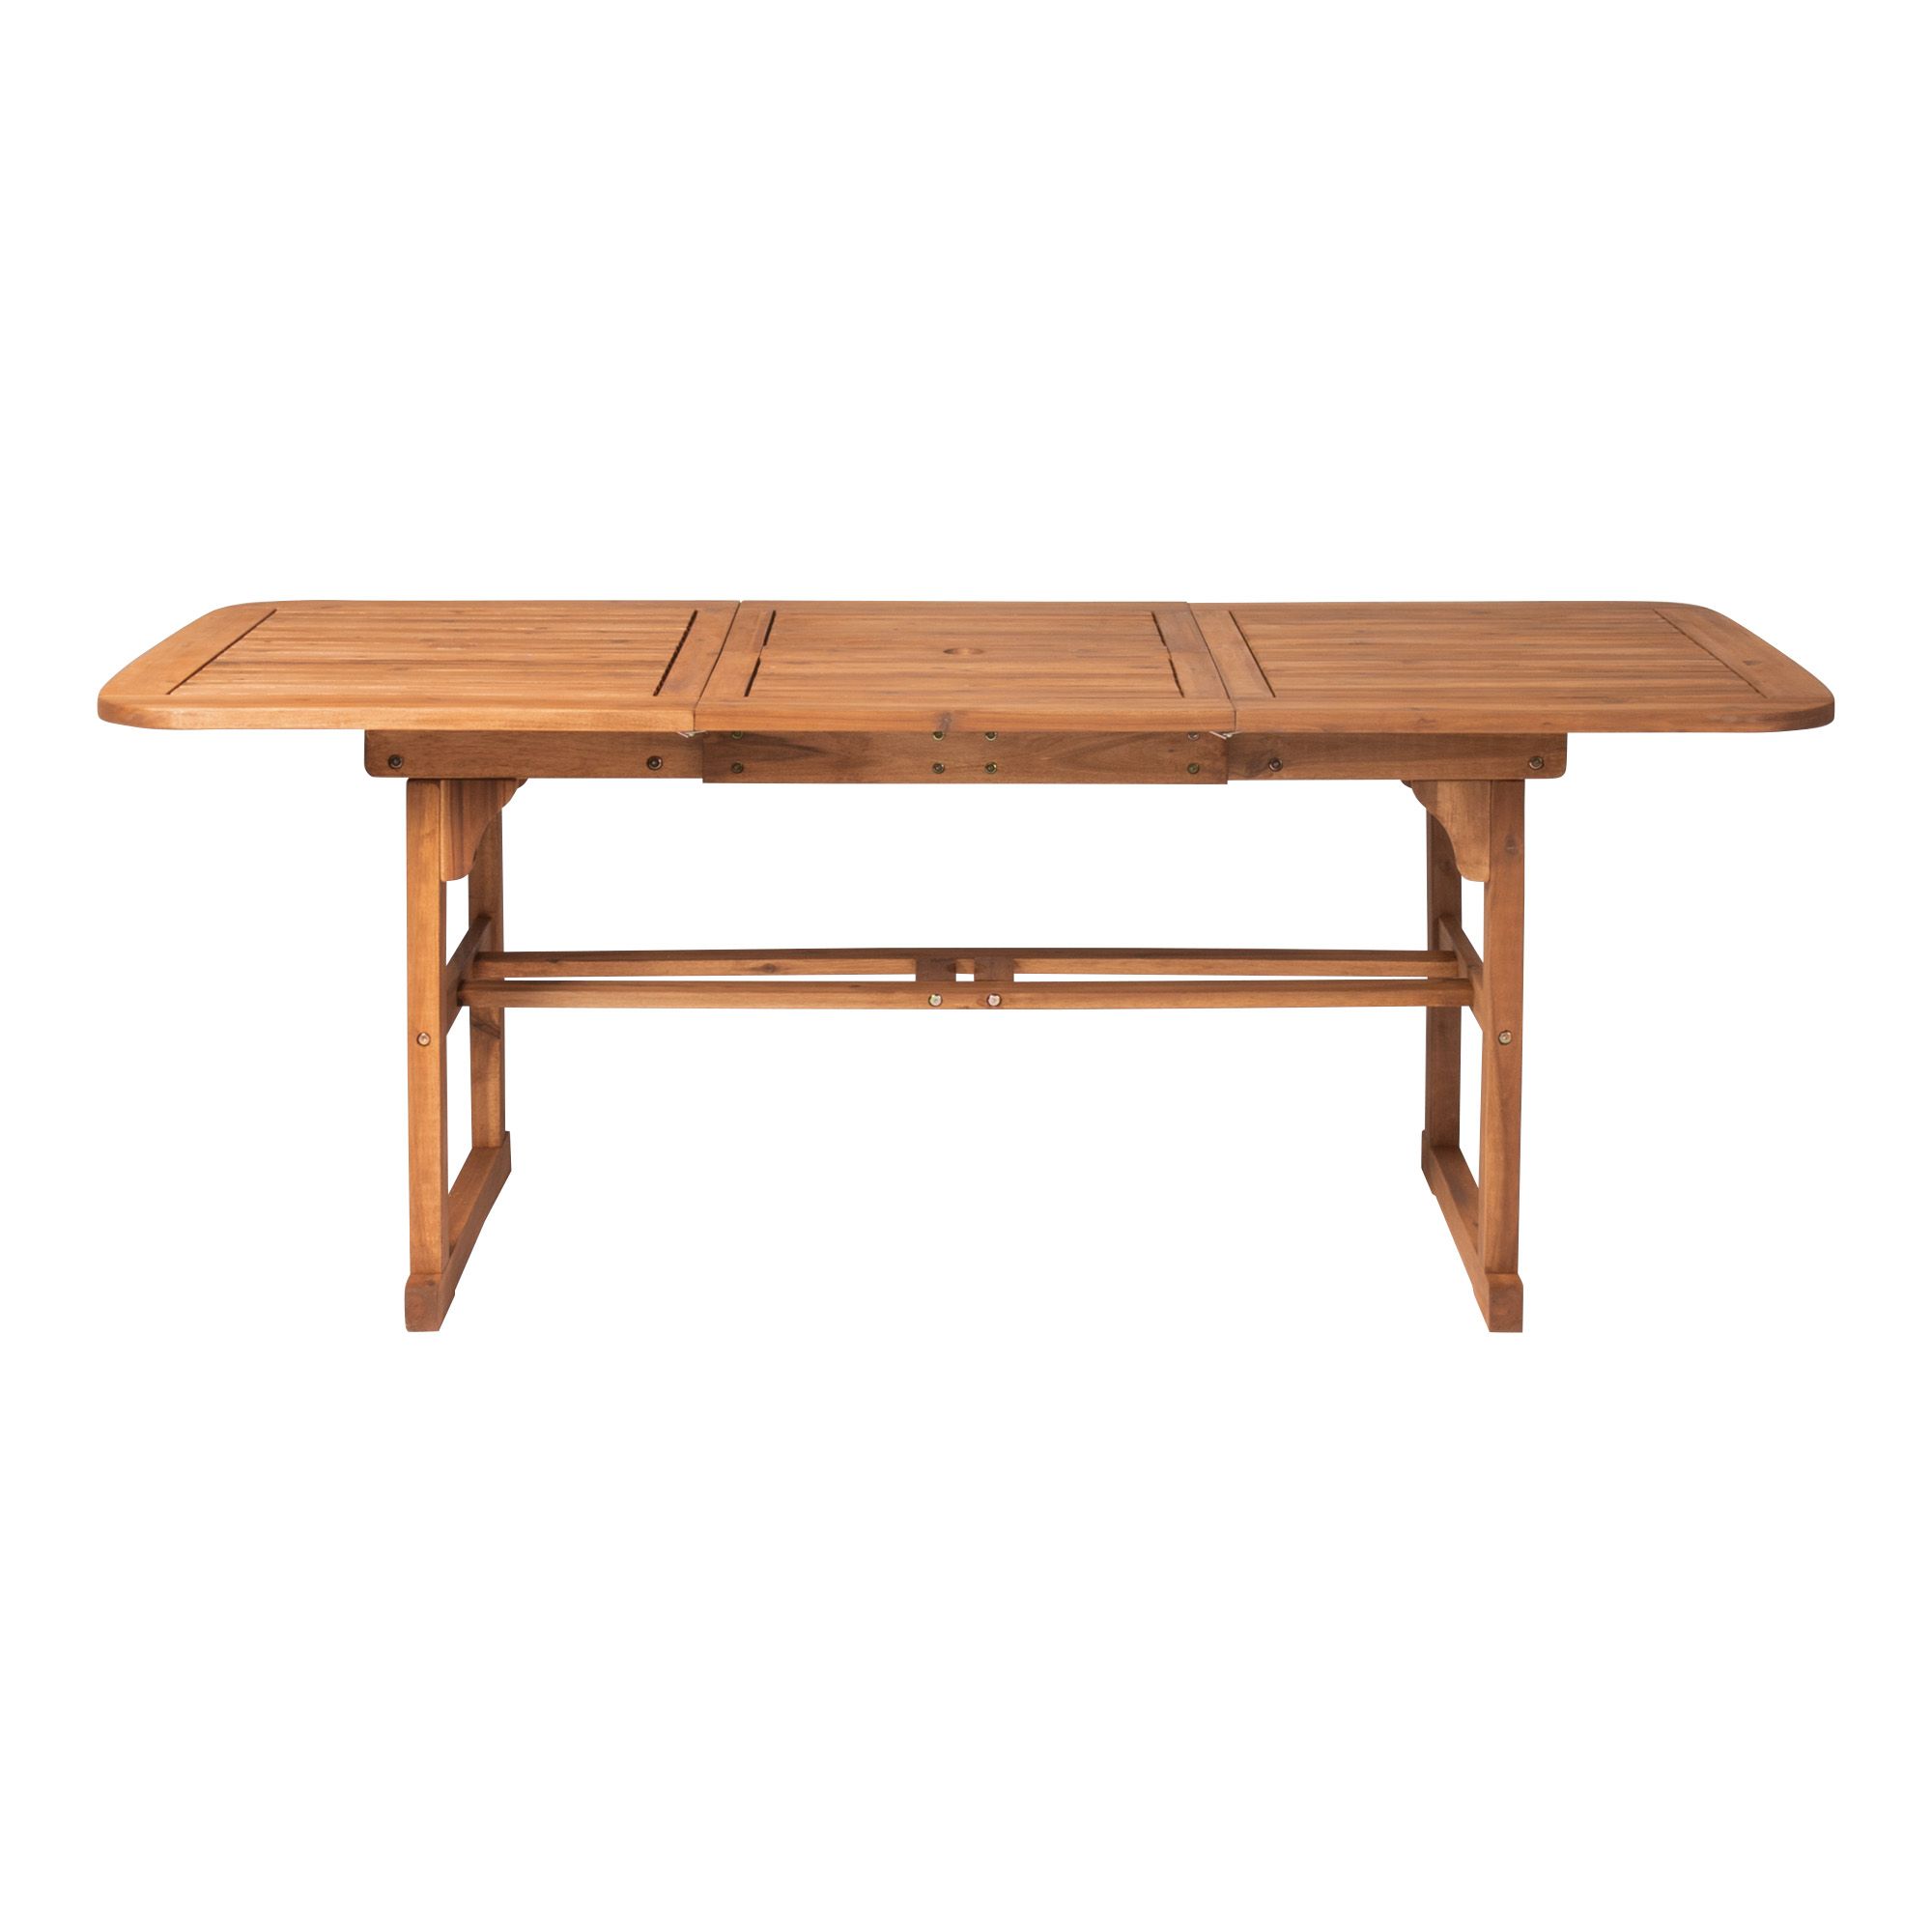 W. Trends Outdoor Hunter Acacia Wood Dining Table - Brown